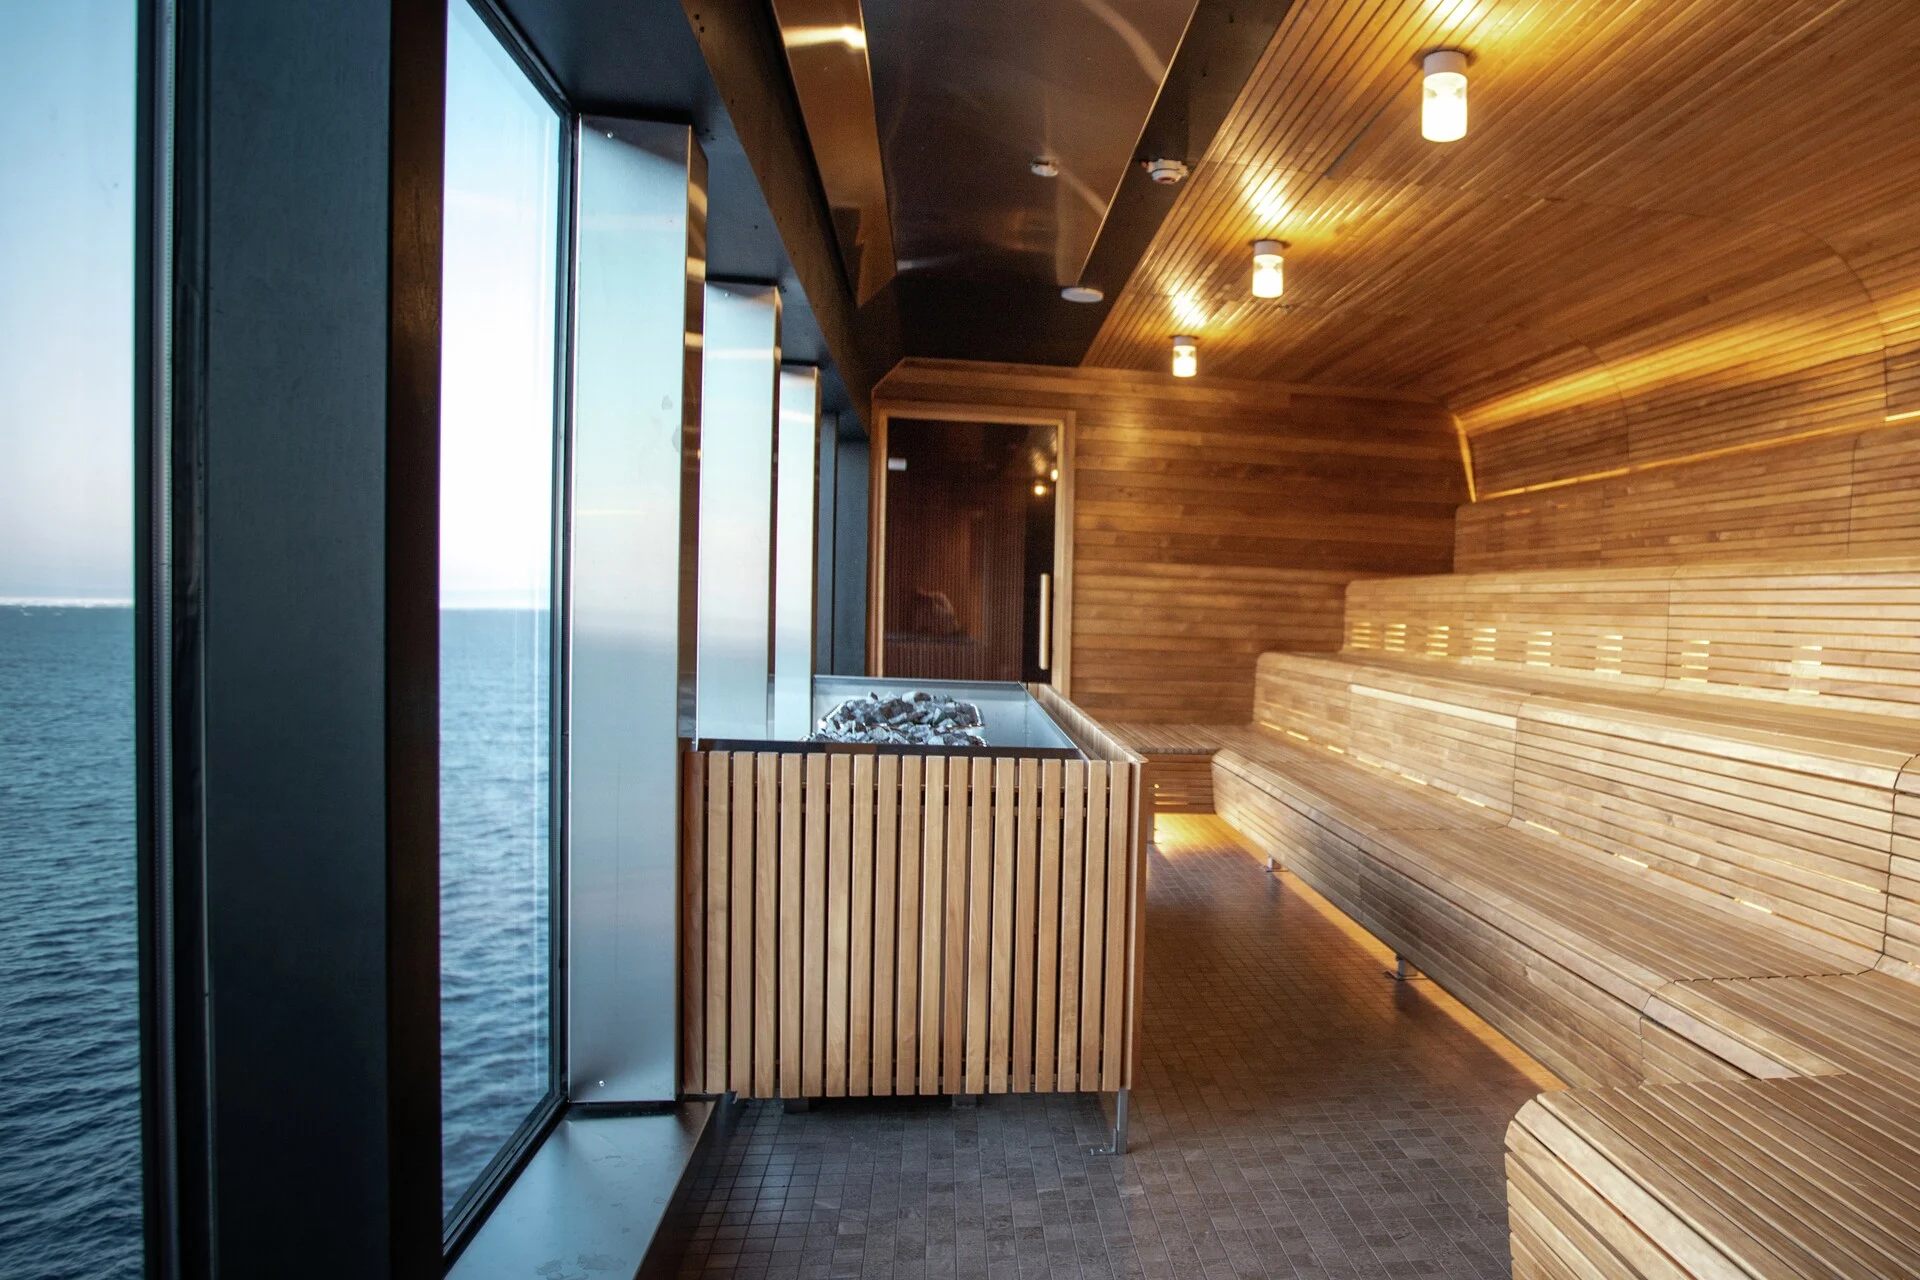 Enjoy the sauna onboard MS Roald Amundsen with its panoramic view over the open sea. Credit: Oscar Farrera